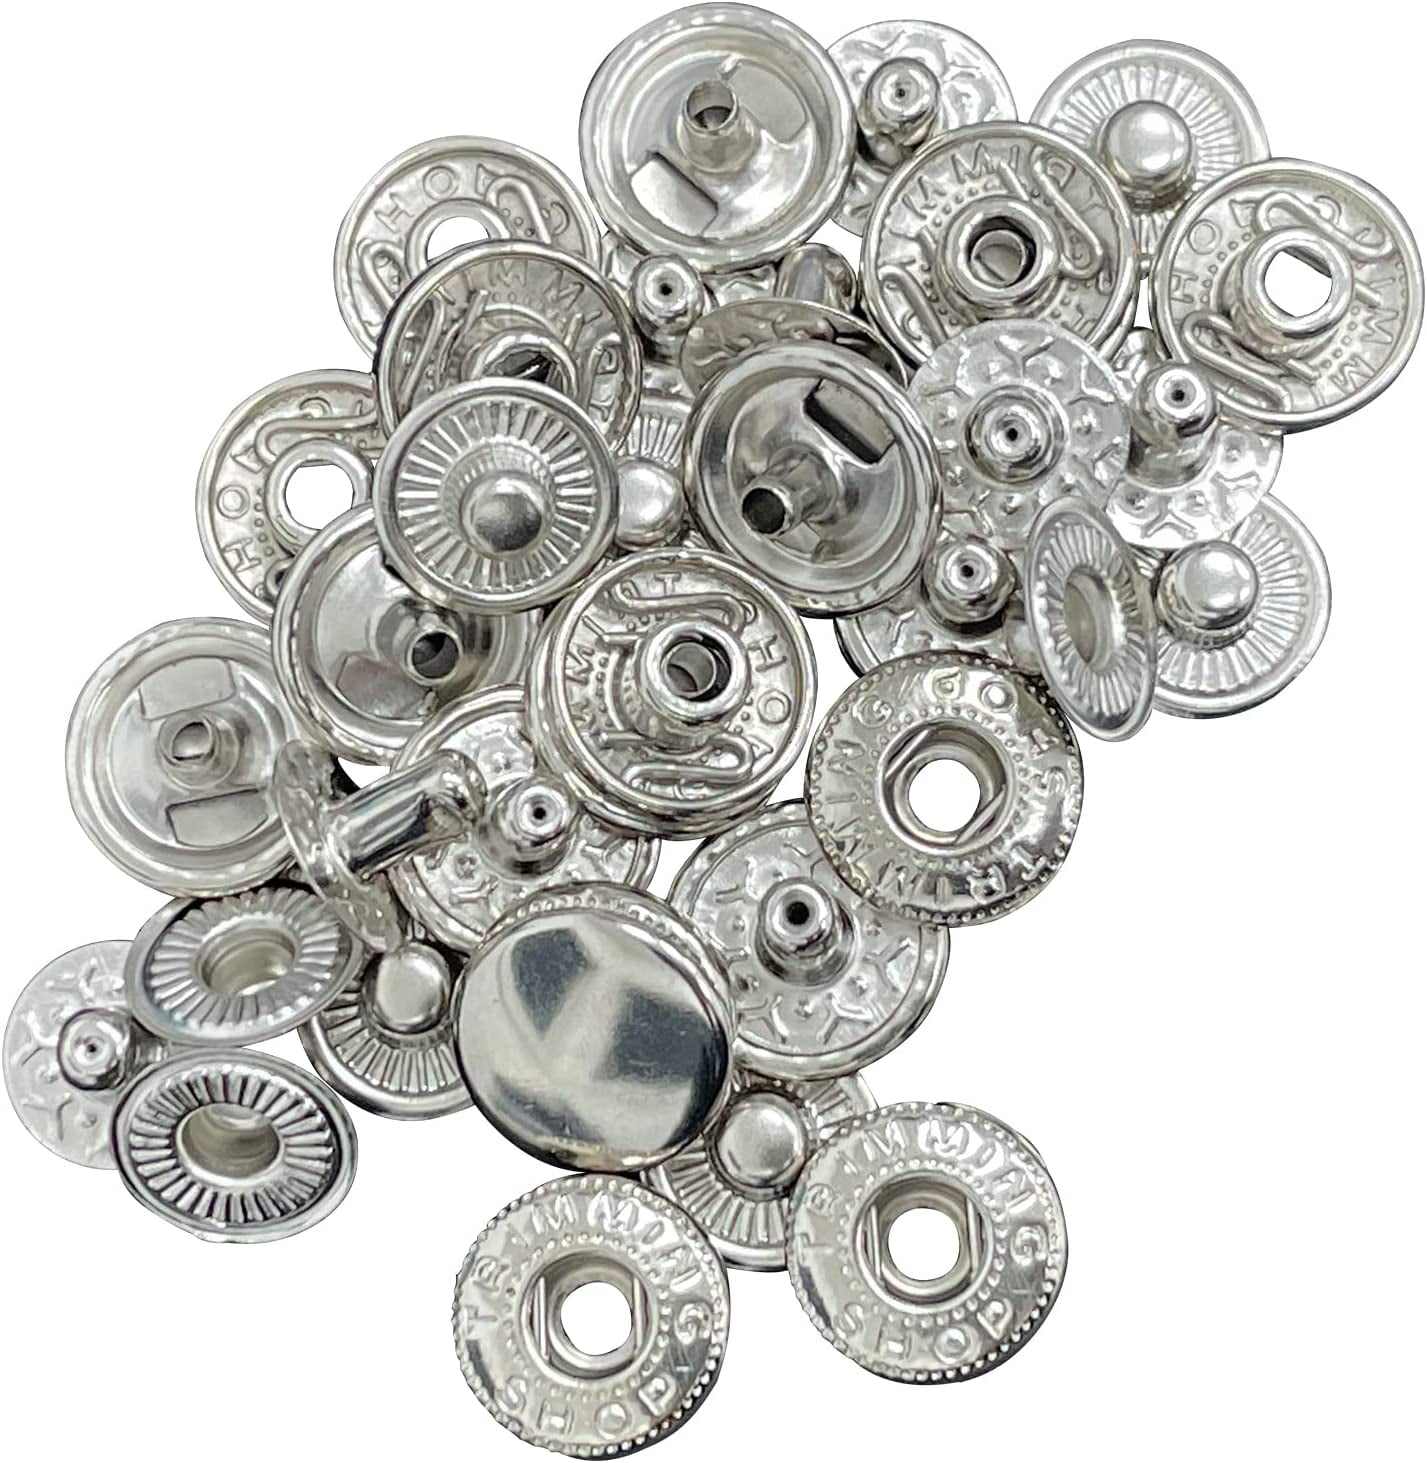 Trimming Shop 20mm S Spring Press Studs 4 Part, Durable and Lightweight,  Metal Snap Buttons Fasteners for Jackets, DIY Leathercrafts, Sewing  Clothing, Purses, Gunmetal Black, 20pcs 